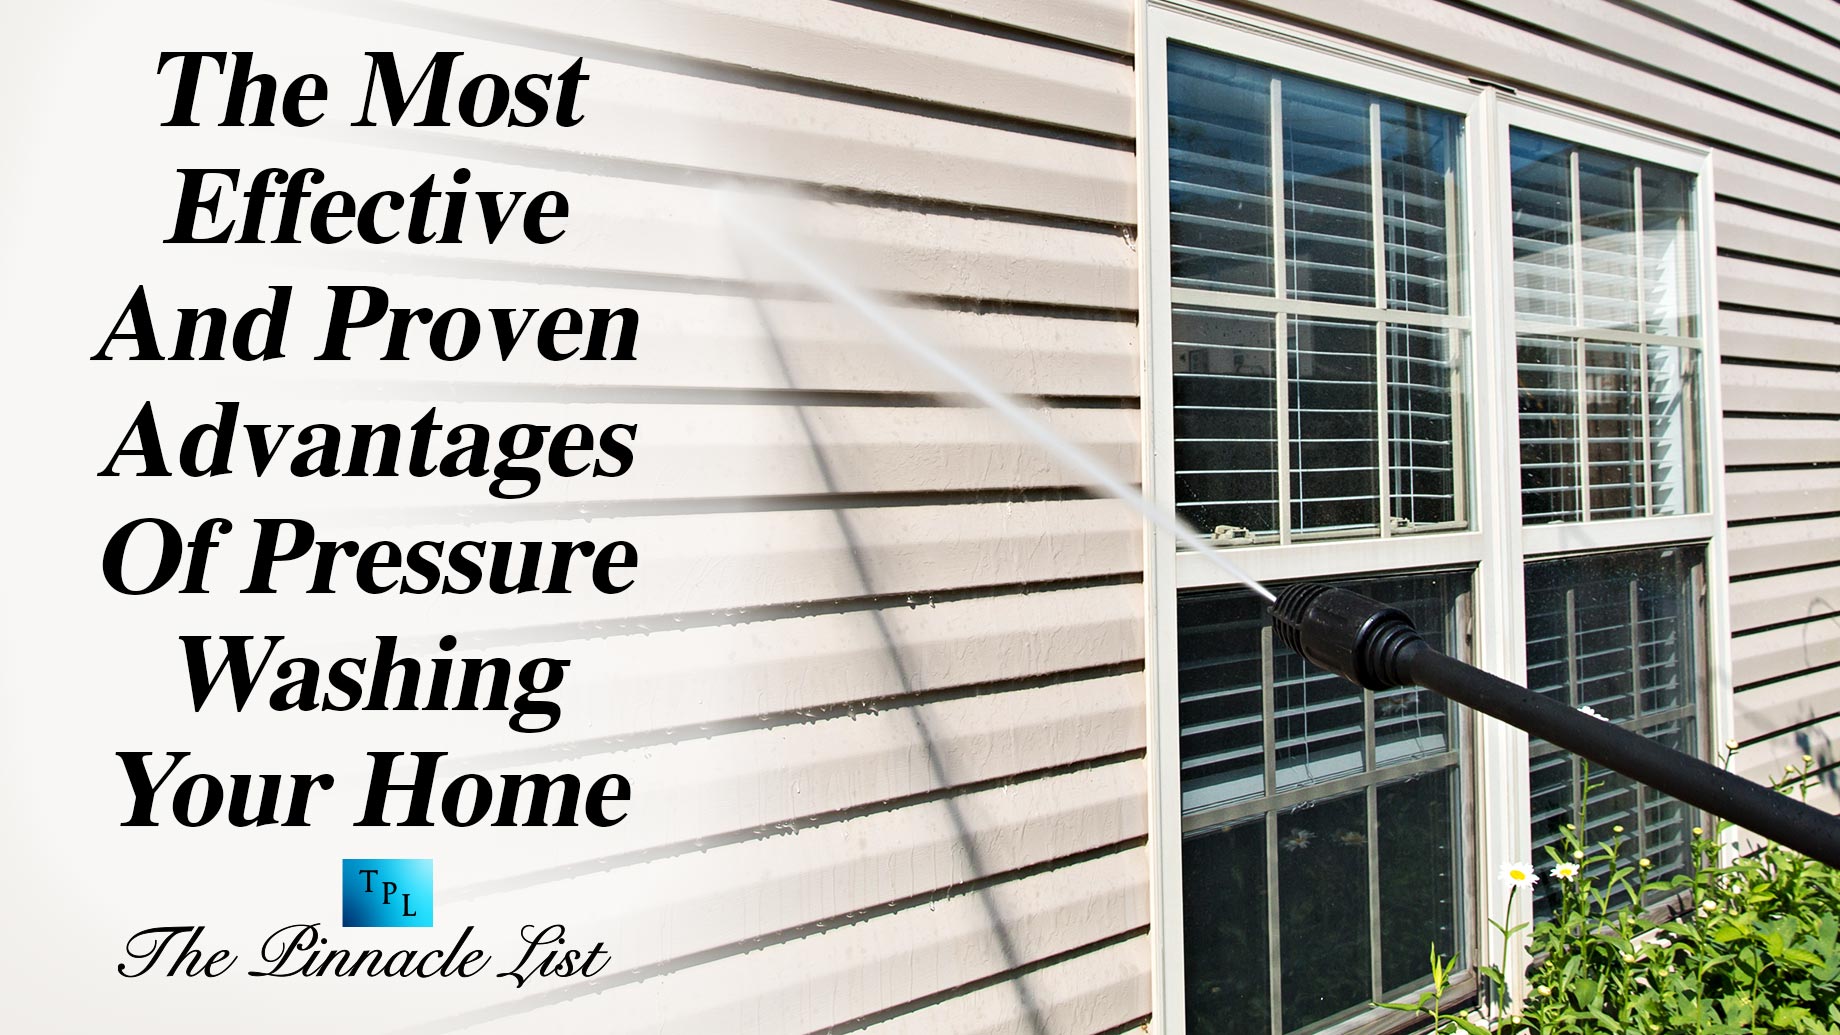 The Most Effective And Proven Advantages Of Pressure Washing Your Home